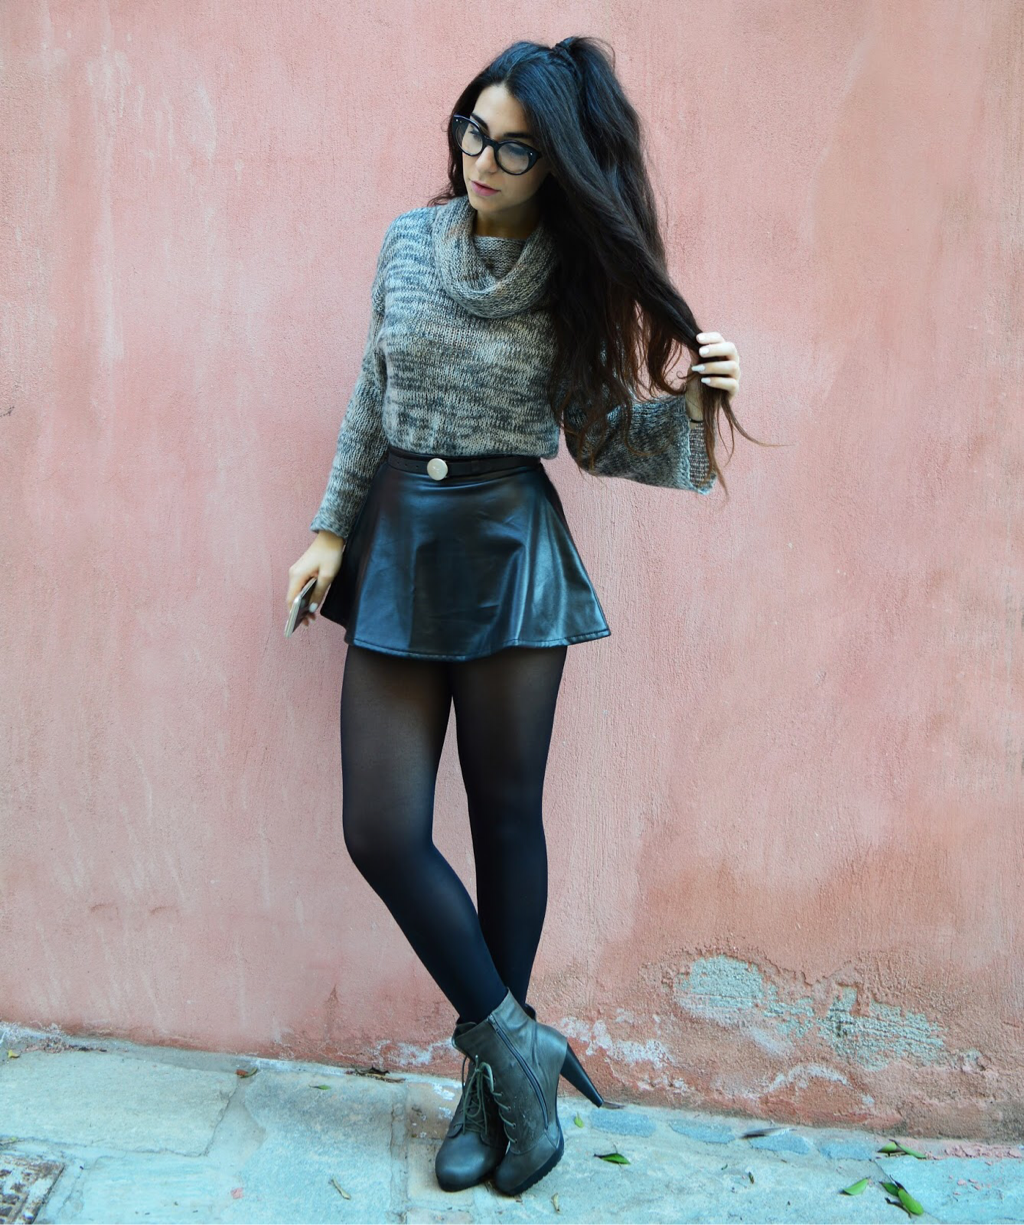 The Geeky Me! - Fashion Tights